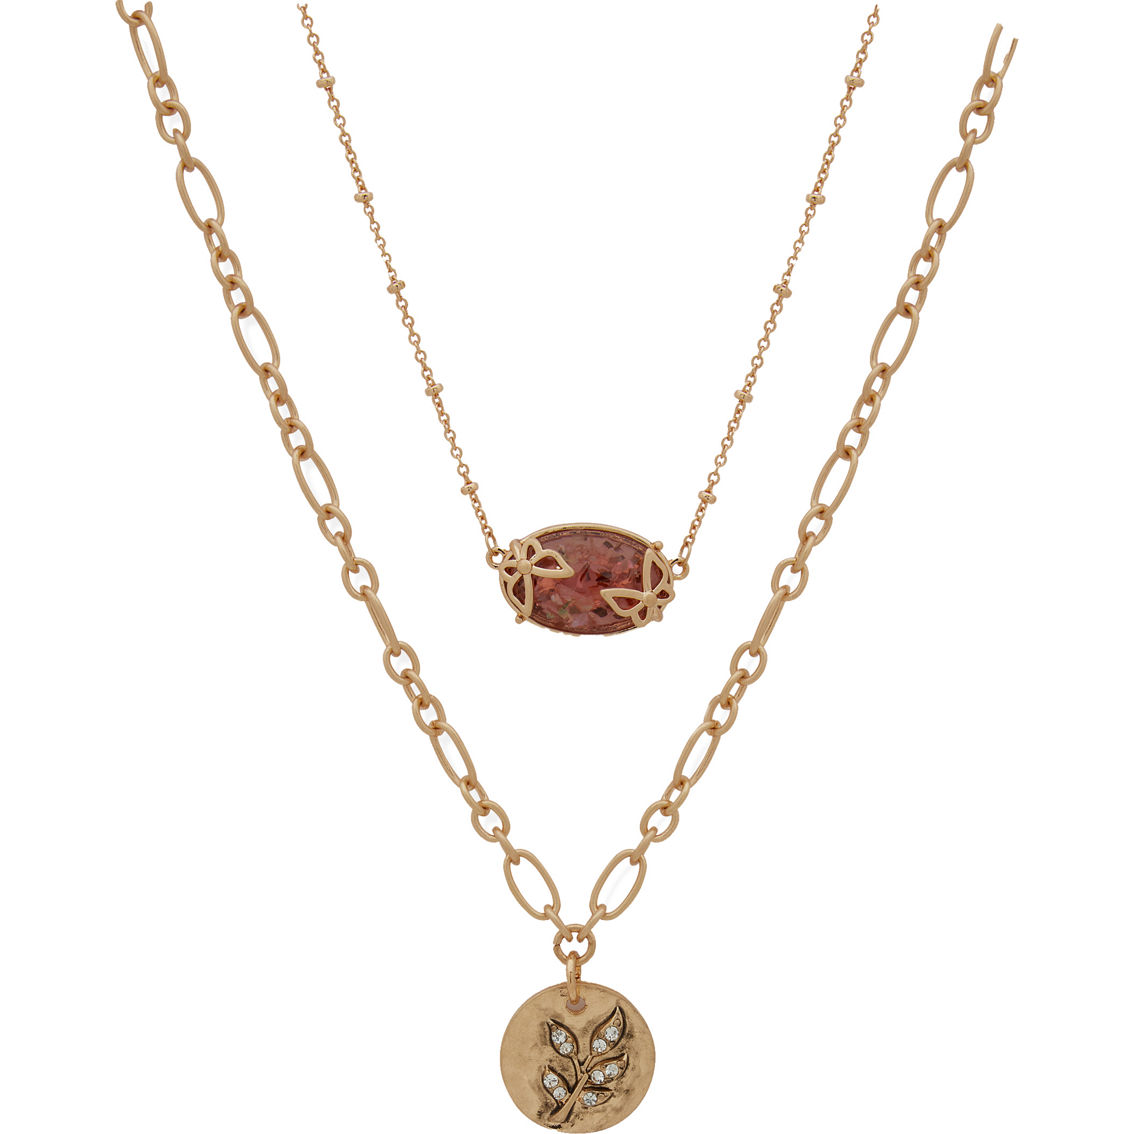 Lonna & Lilly Goldtone White Crystal Flower Pendant Necklace | Other ...